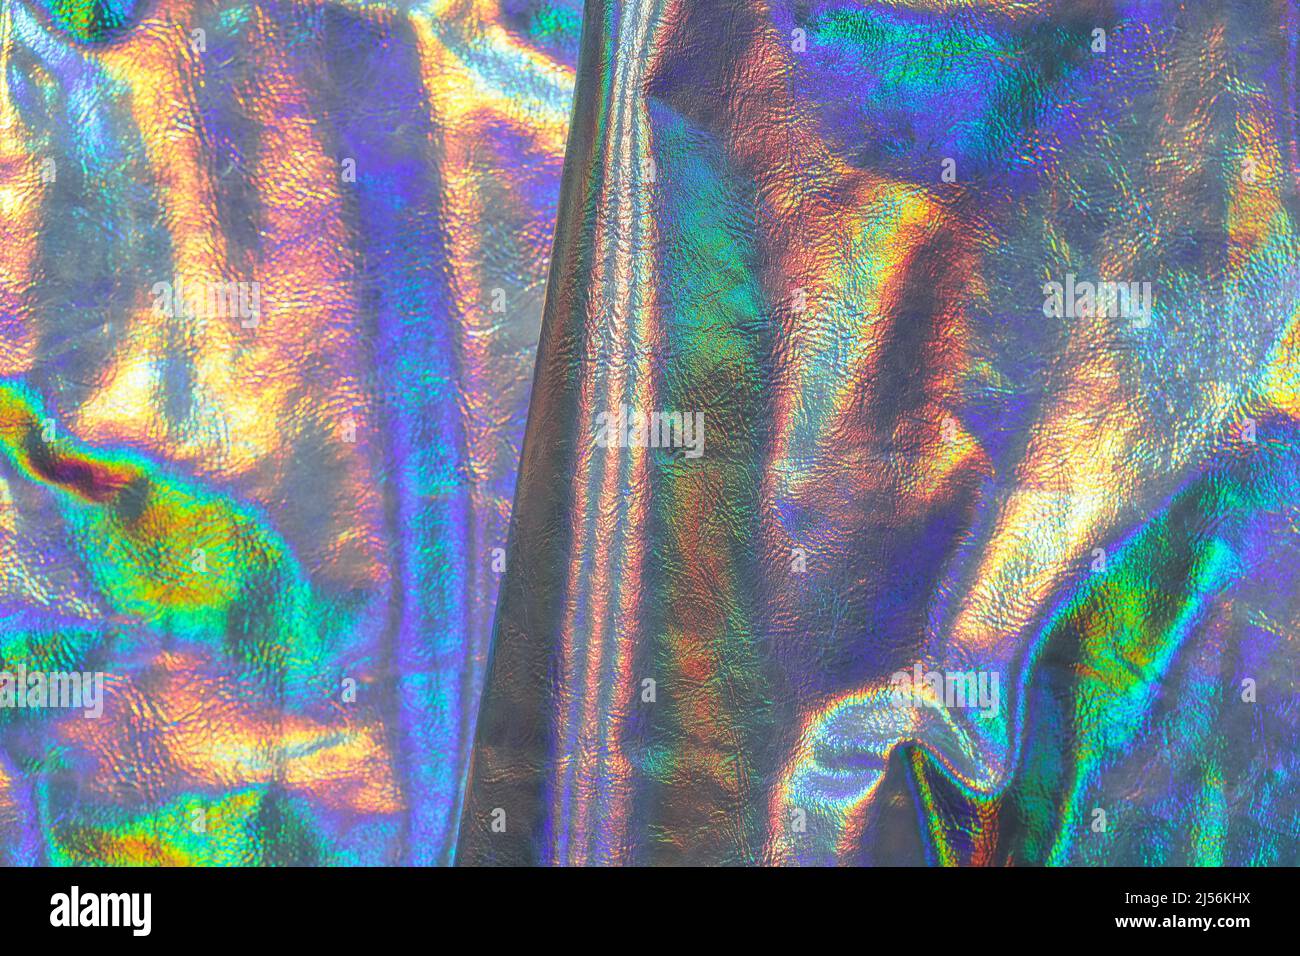 Holographic background. wallpaper In silver, purple colors.metal holographic material. texture with iridescent waves and folds. Stock Photo